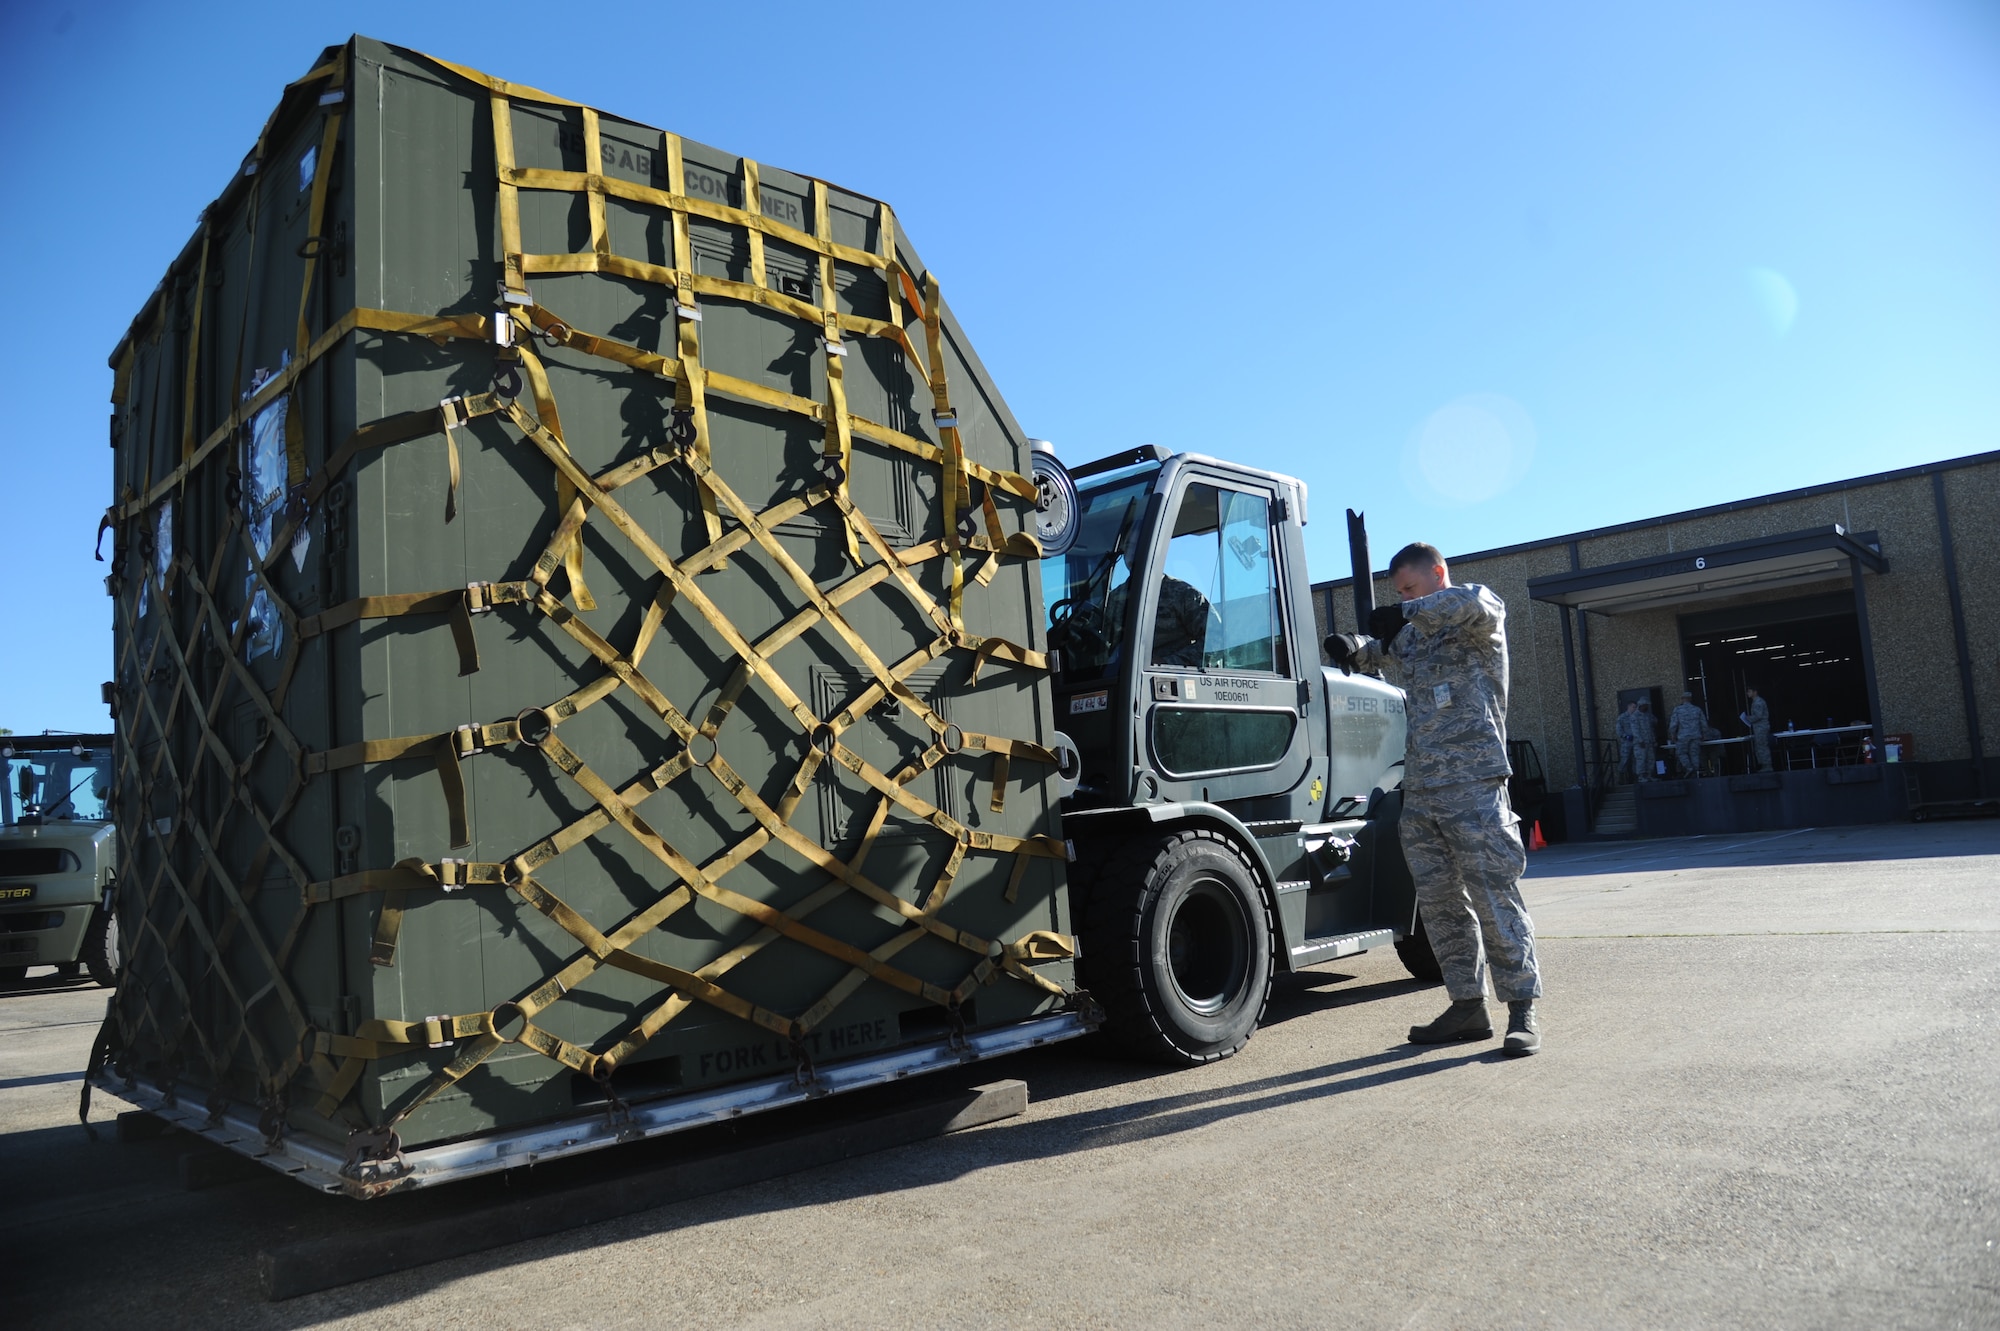 Staff Sgt. David Frahm, 81st Logistics Readiness Squadron, provides direction to Airman 1st Class Daniel Litardo, 81st LRS, as he operates a forklift for transporting cargo at the supply warehouse loading docks during a humanitarian deployment exercise Oct. 15, 2014, at the Taylor Logistics Center, Keesler Air Force Base, Miss.  The exercise tested the mission readiness of Team Keesler members for world-wide deployments. (U.S. Air Force photo by Kemberly Groue)